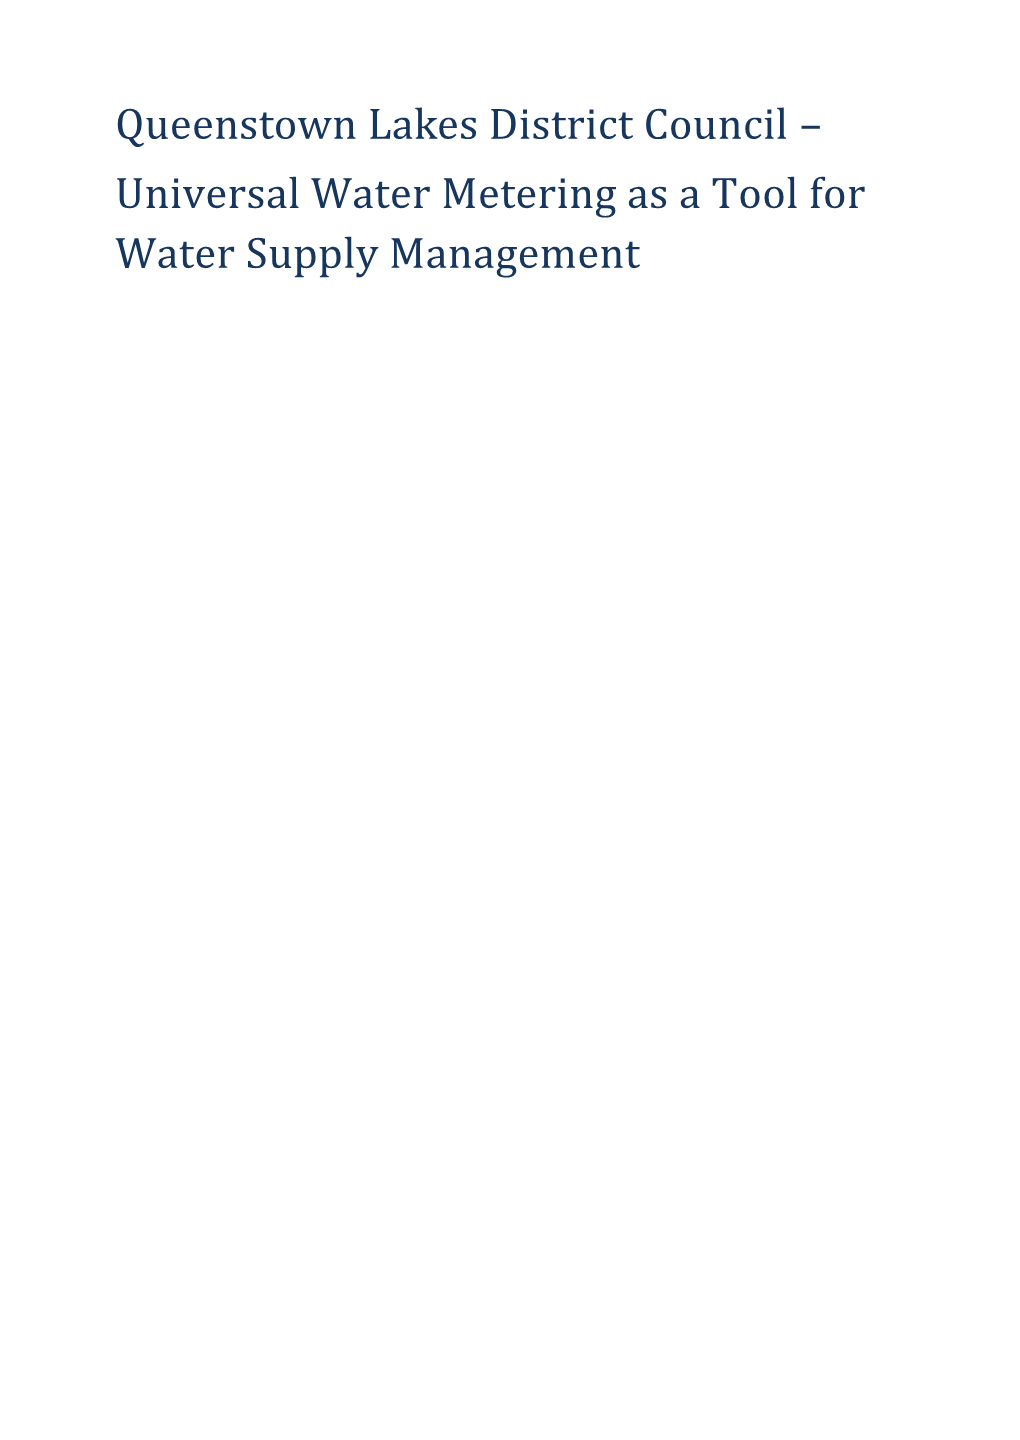 Universal Water Metering As a Tool for Water Supply Management 2